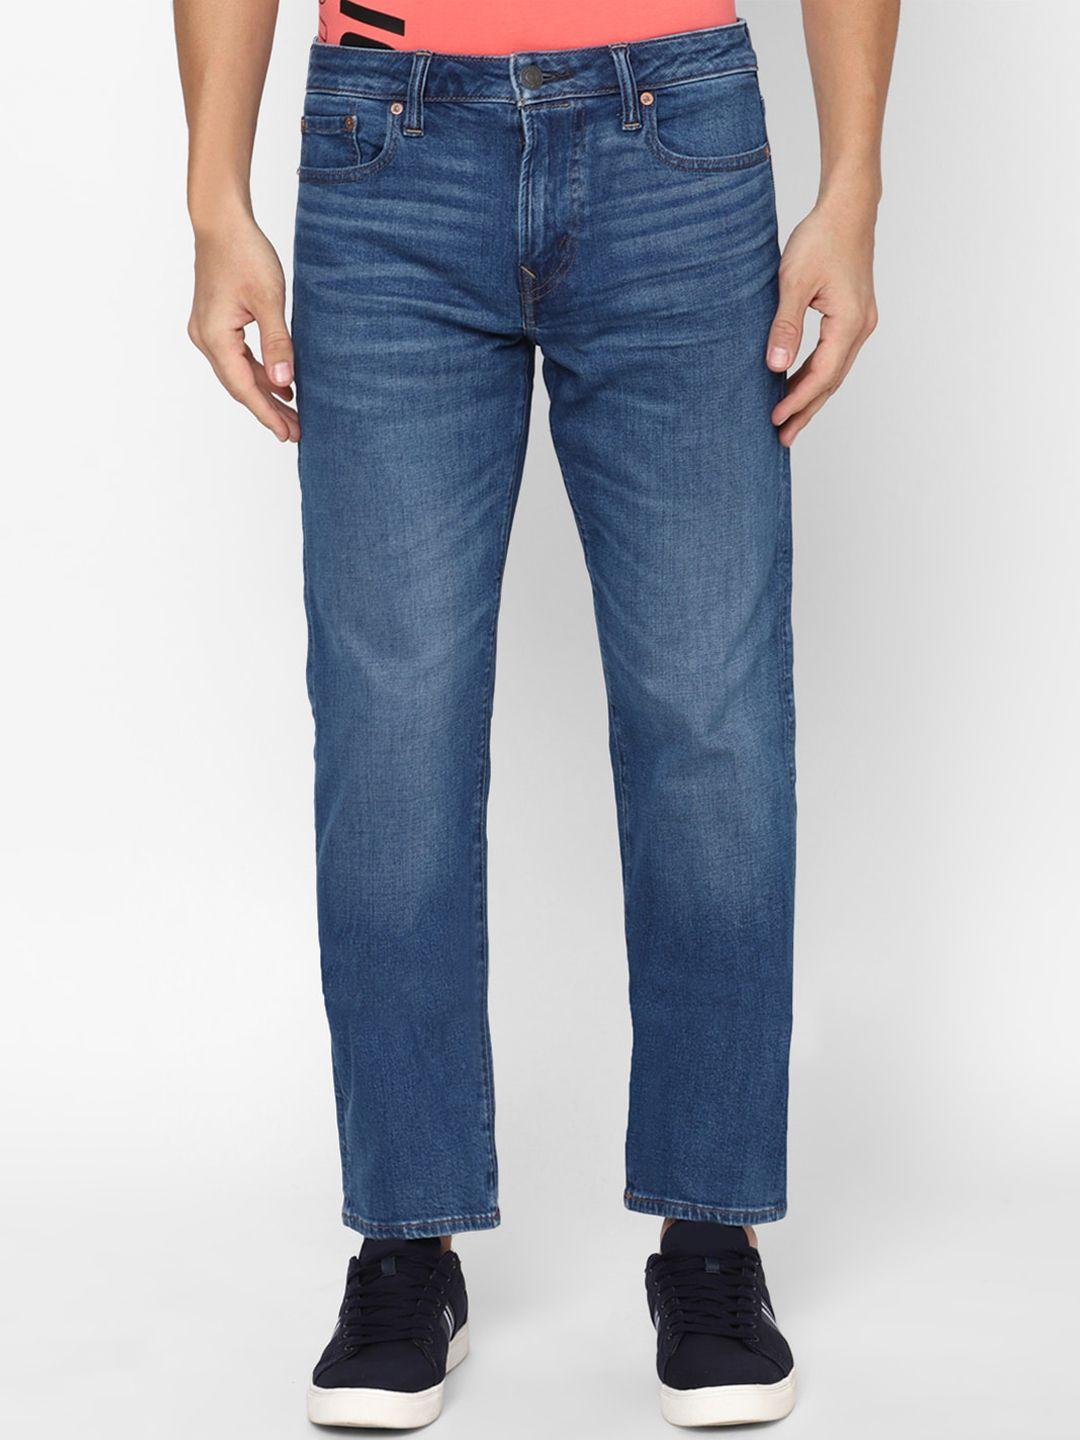 american-eagle-outfitters-men-mid-rise-light-fade-jeans